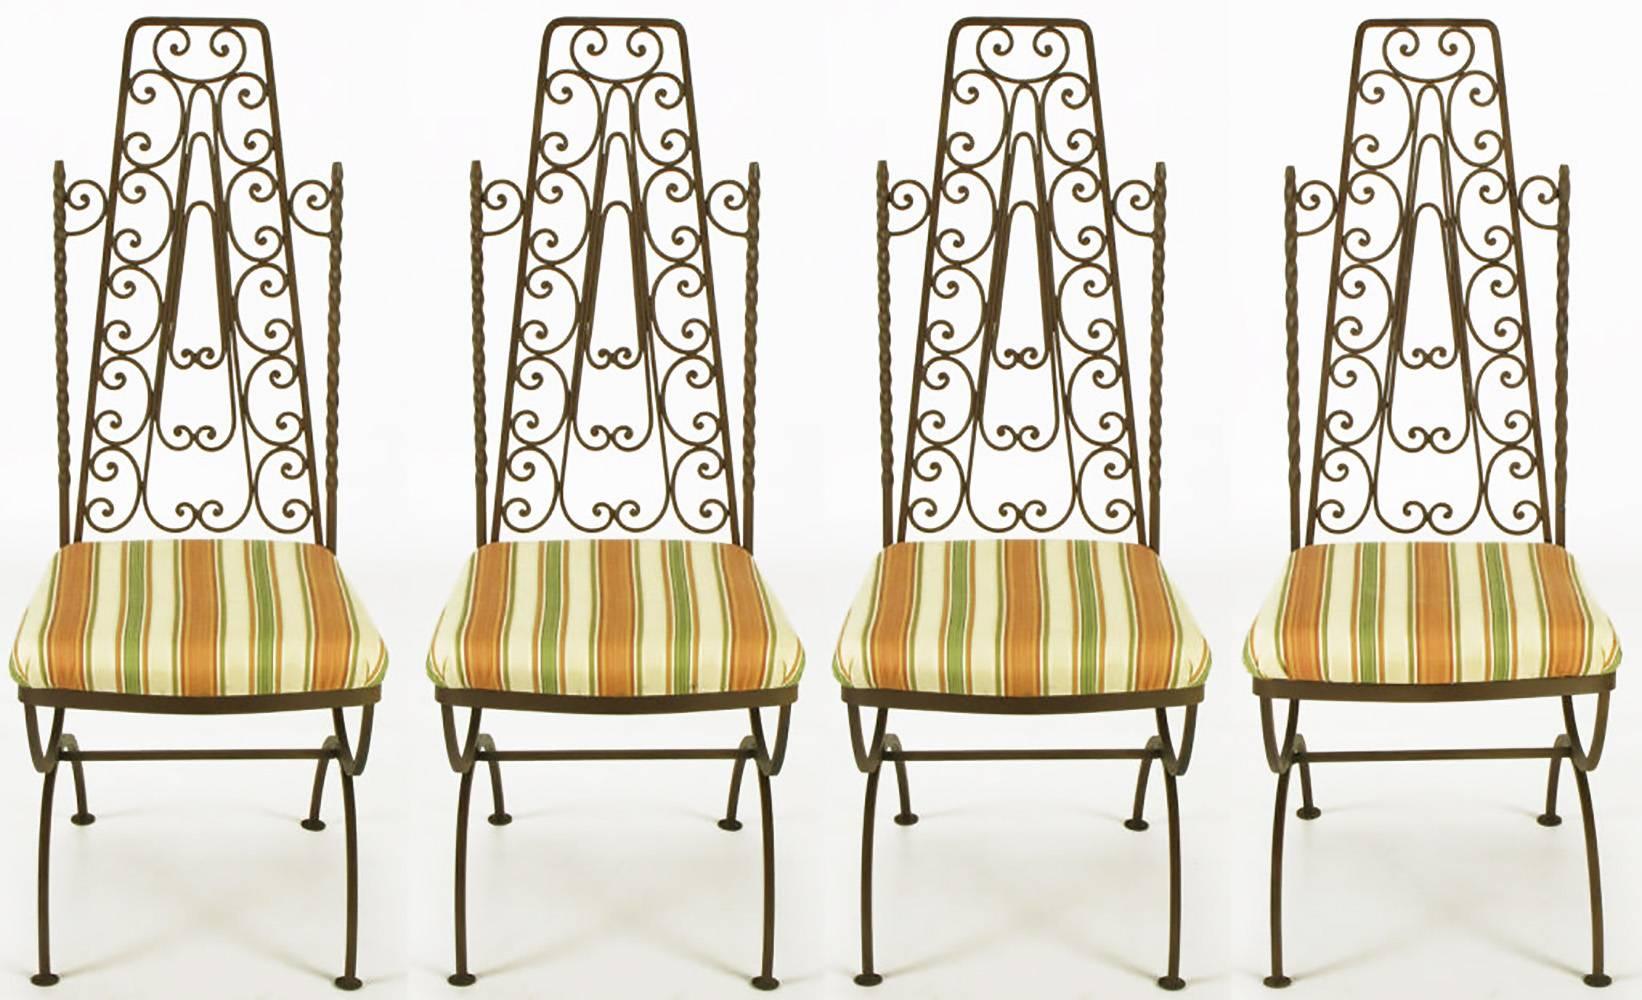 Spanish revival style hand-wrought iron, dark chocolate lacquered dining chairs. Twisted and filigreed open iron backs with fixed seat cushions upholstered in a striped silk of olive, peach and cream. Curule form legs with center stretchers. Could